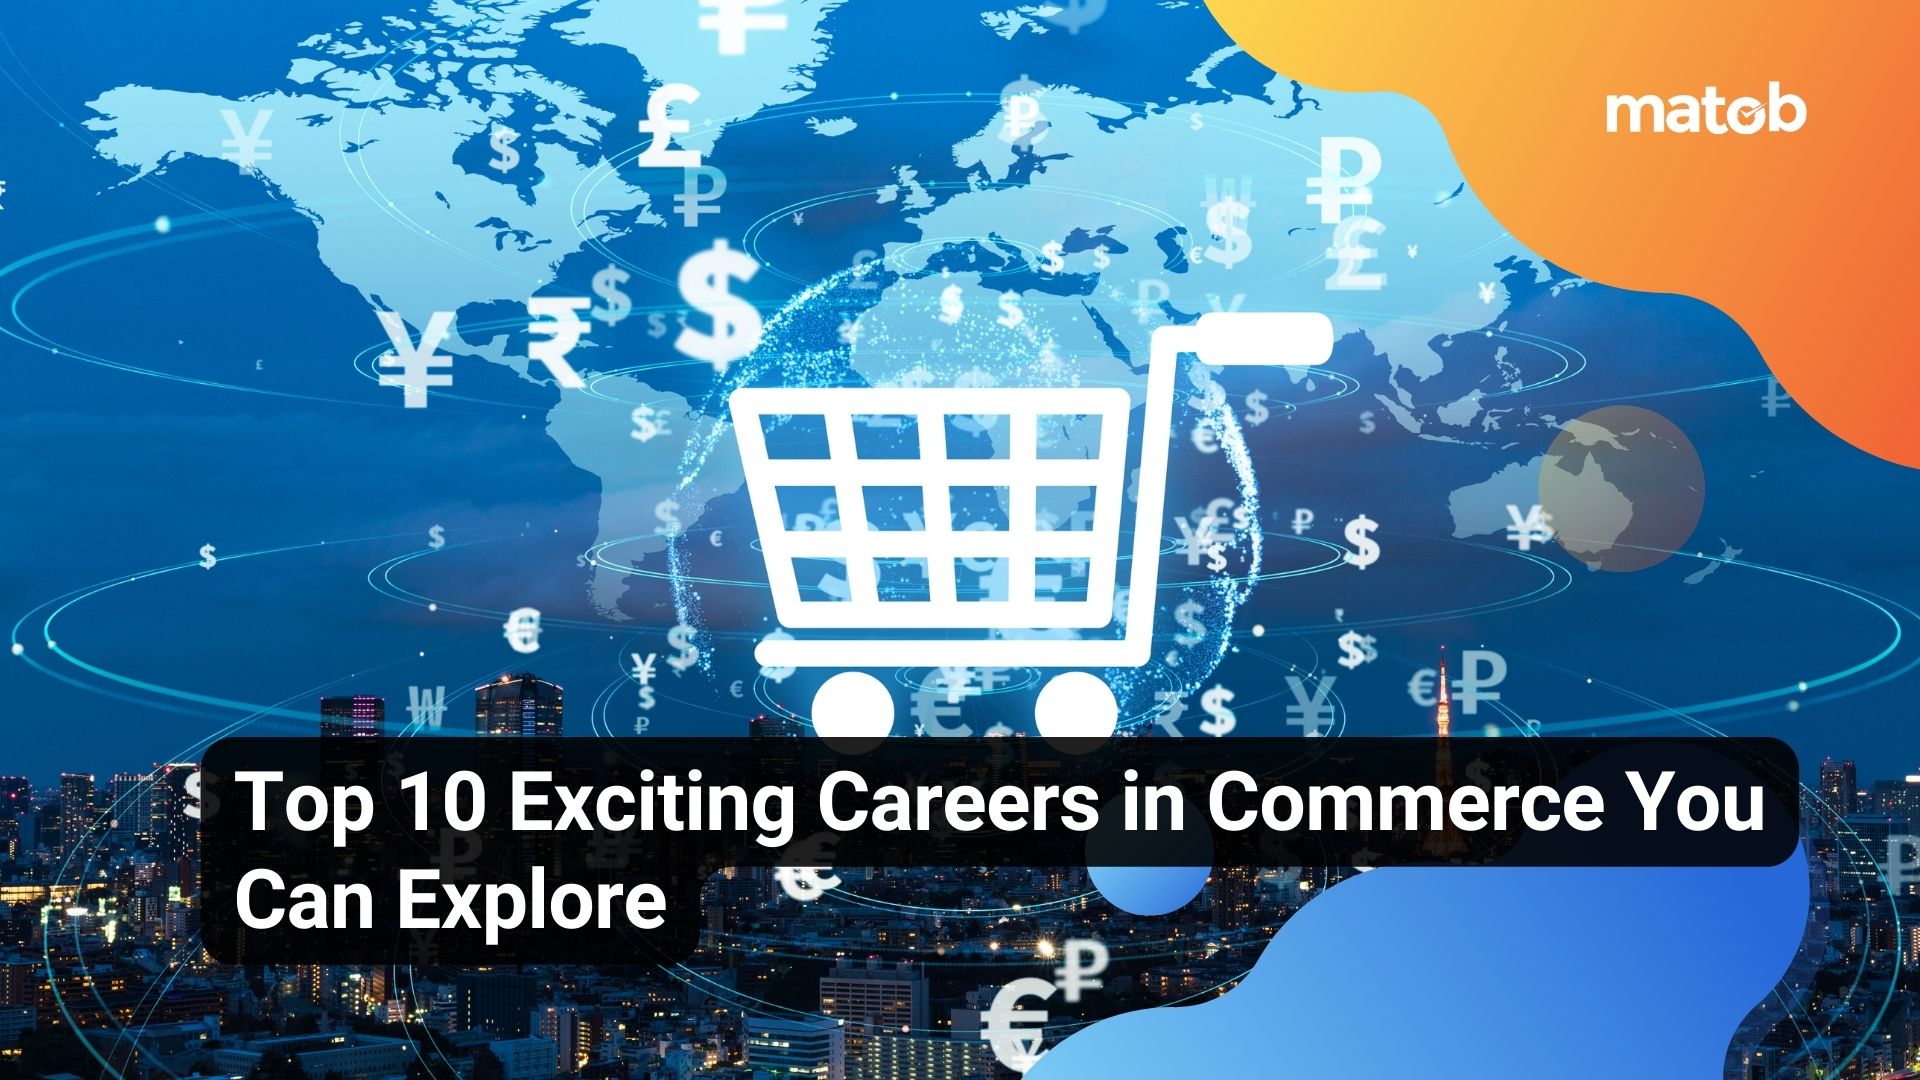 Top 10 Exciting Careers in Commerce You Can Explore